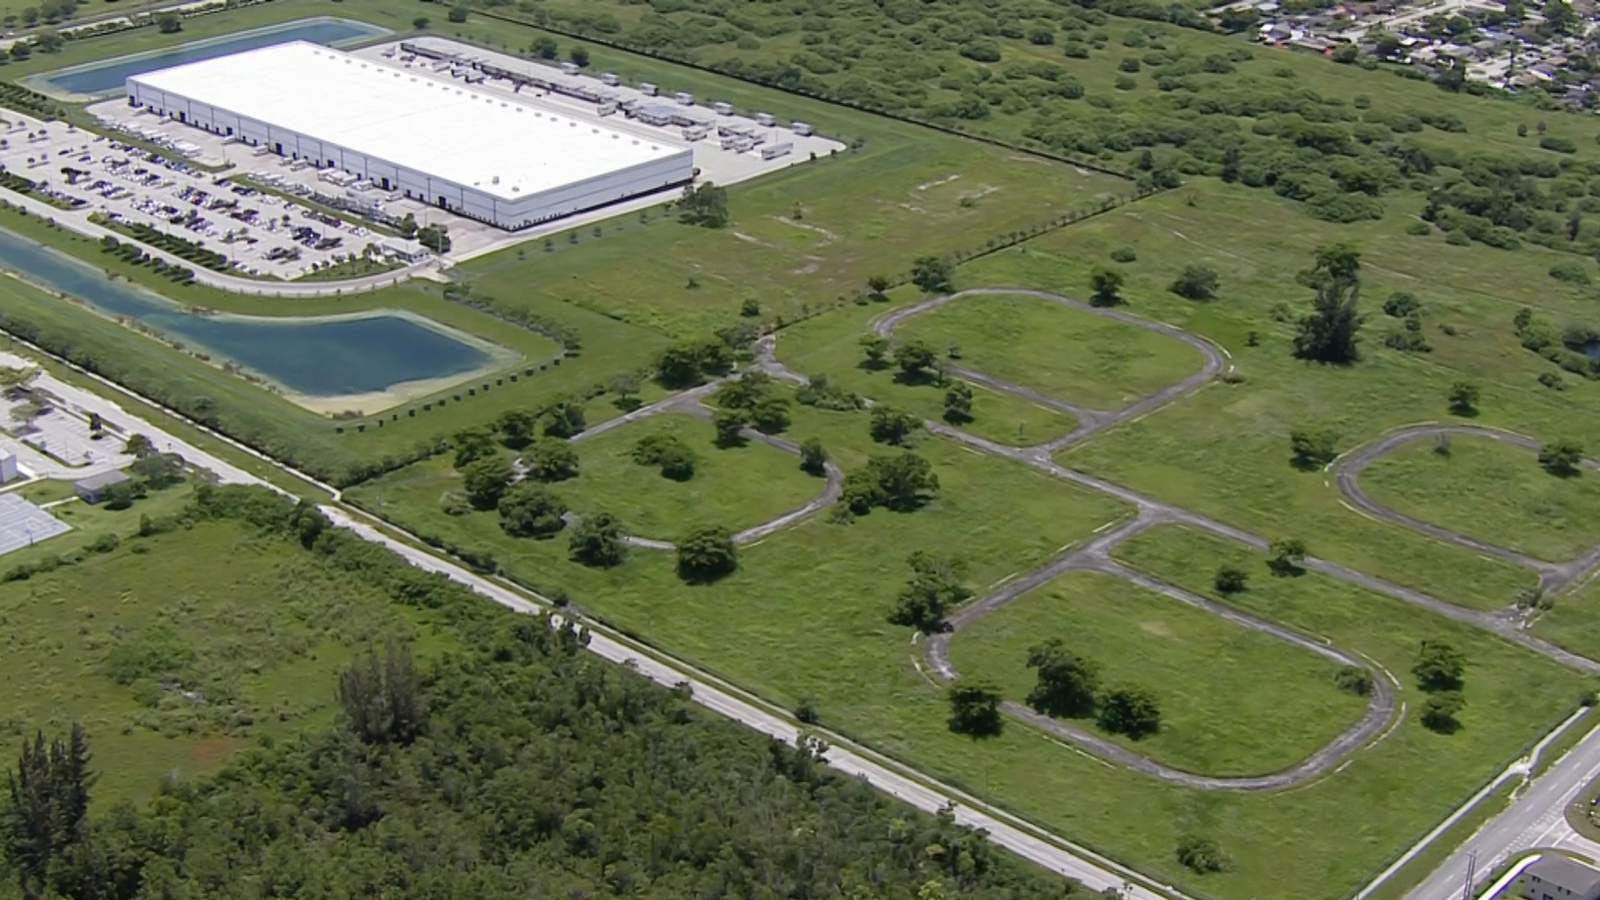 Amazon hopes to build million-square-feet of warehouse space in Naranja